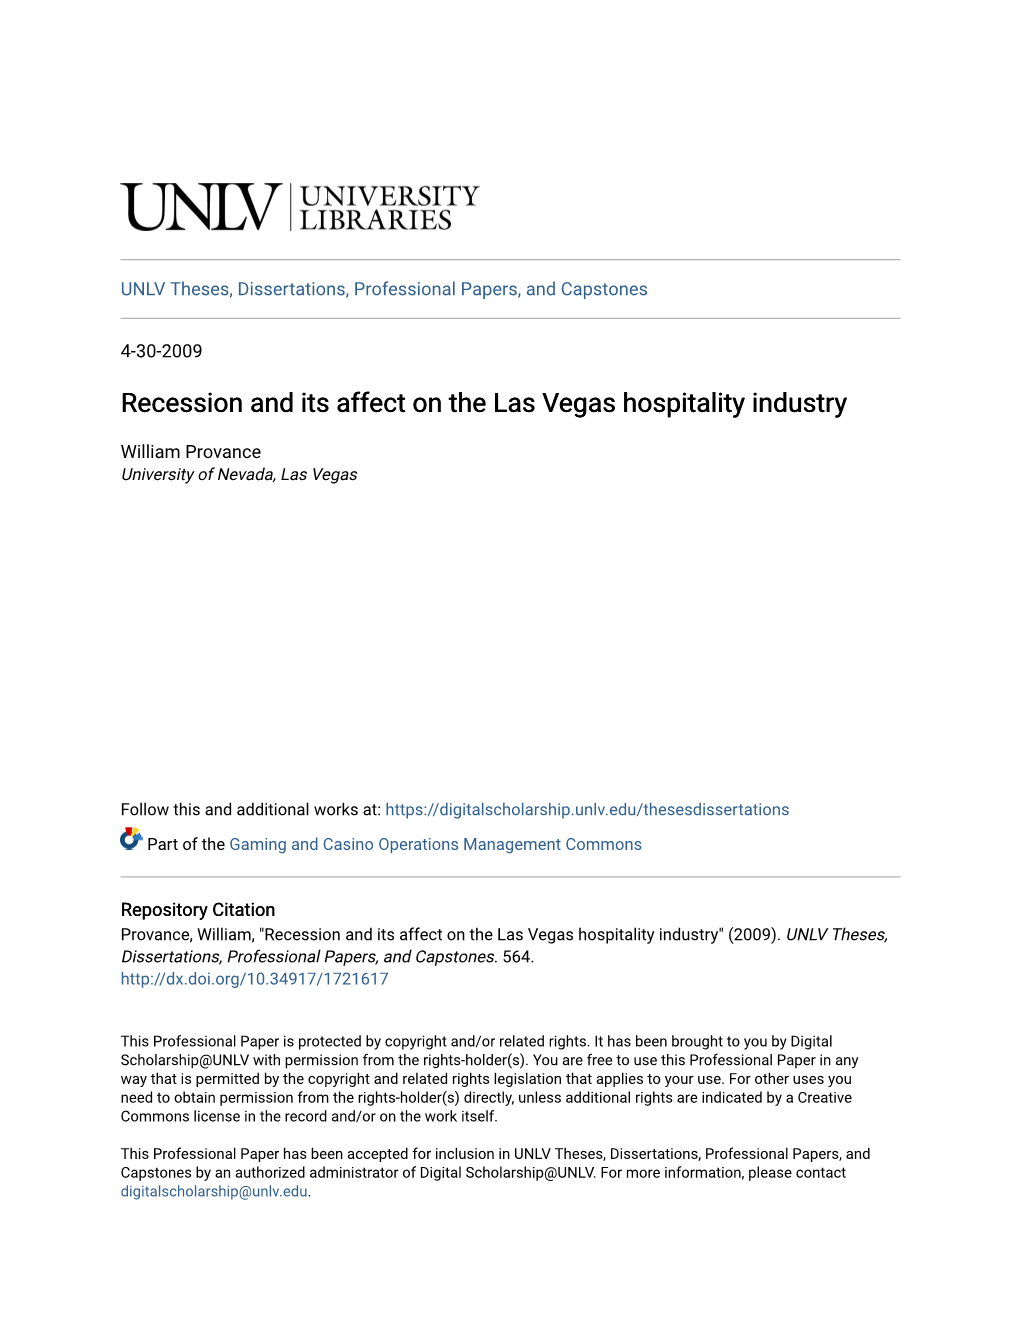 Recession and Its Affect on the Las Vegas Hospitality Industry